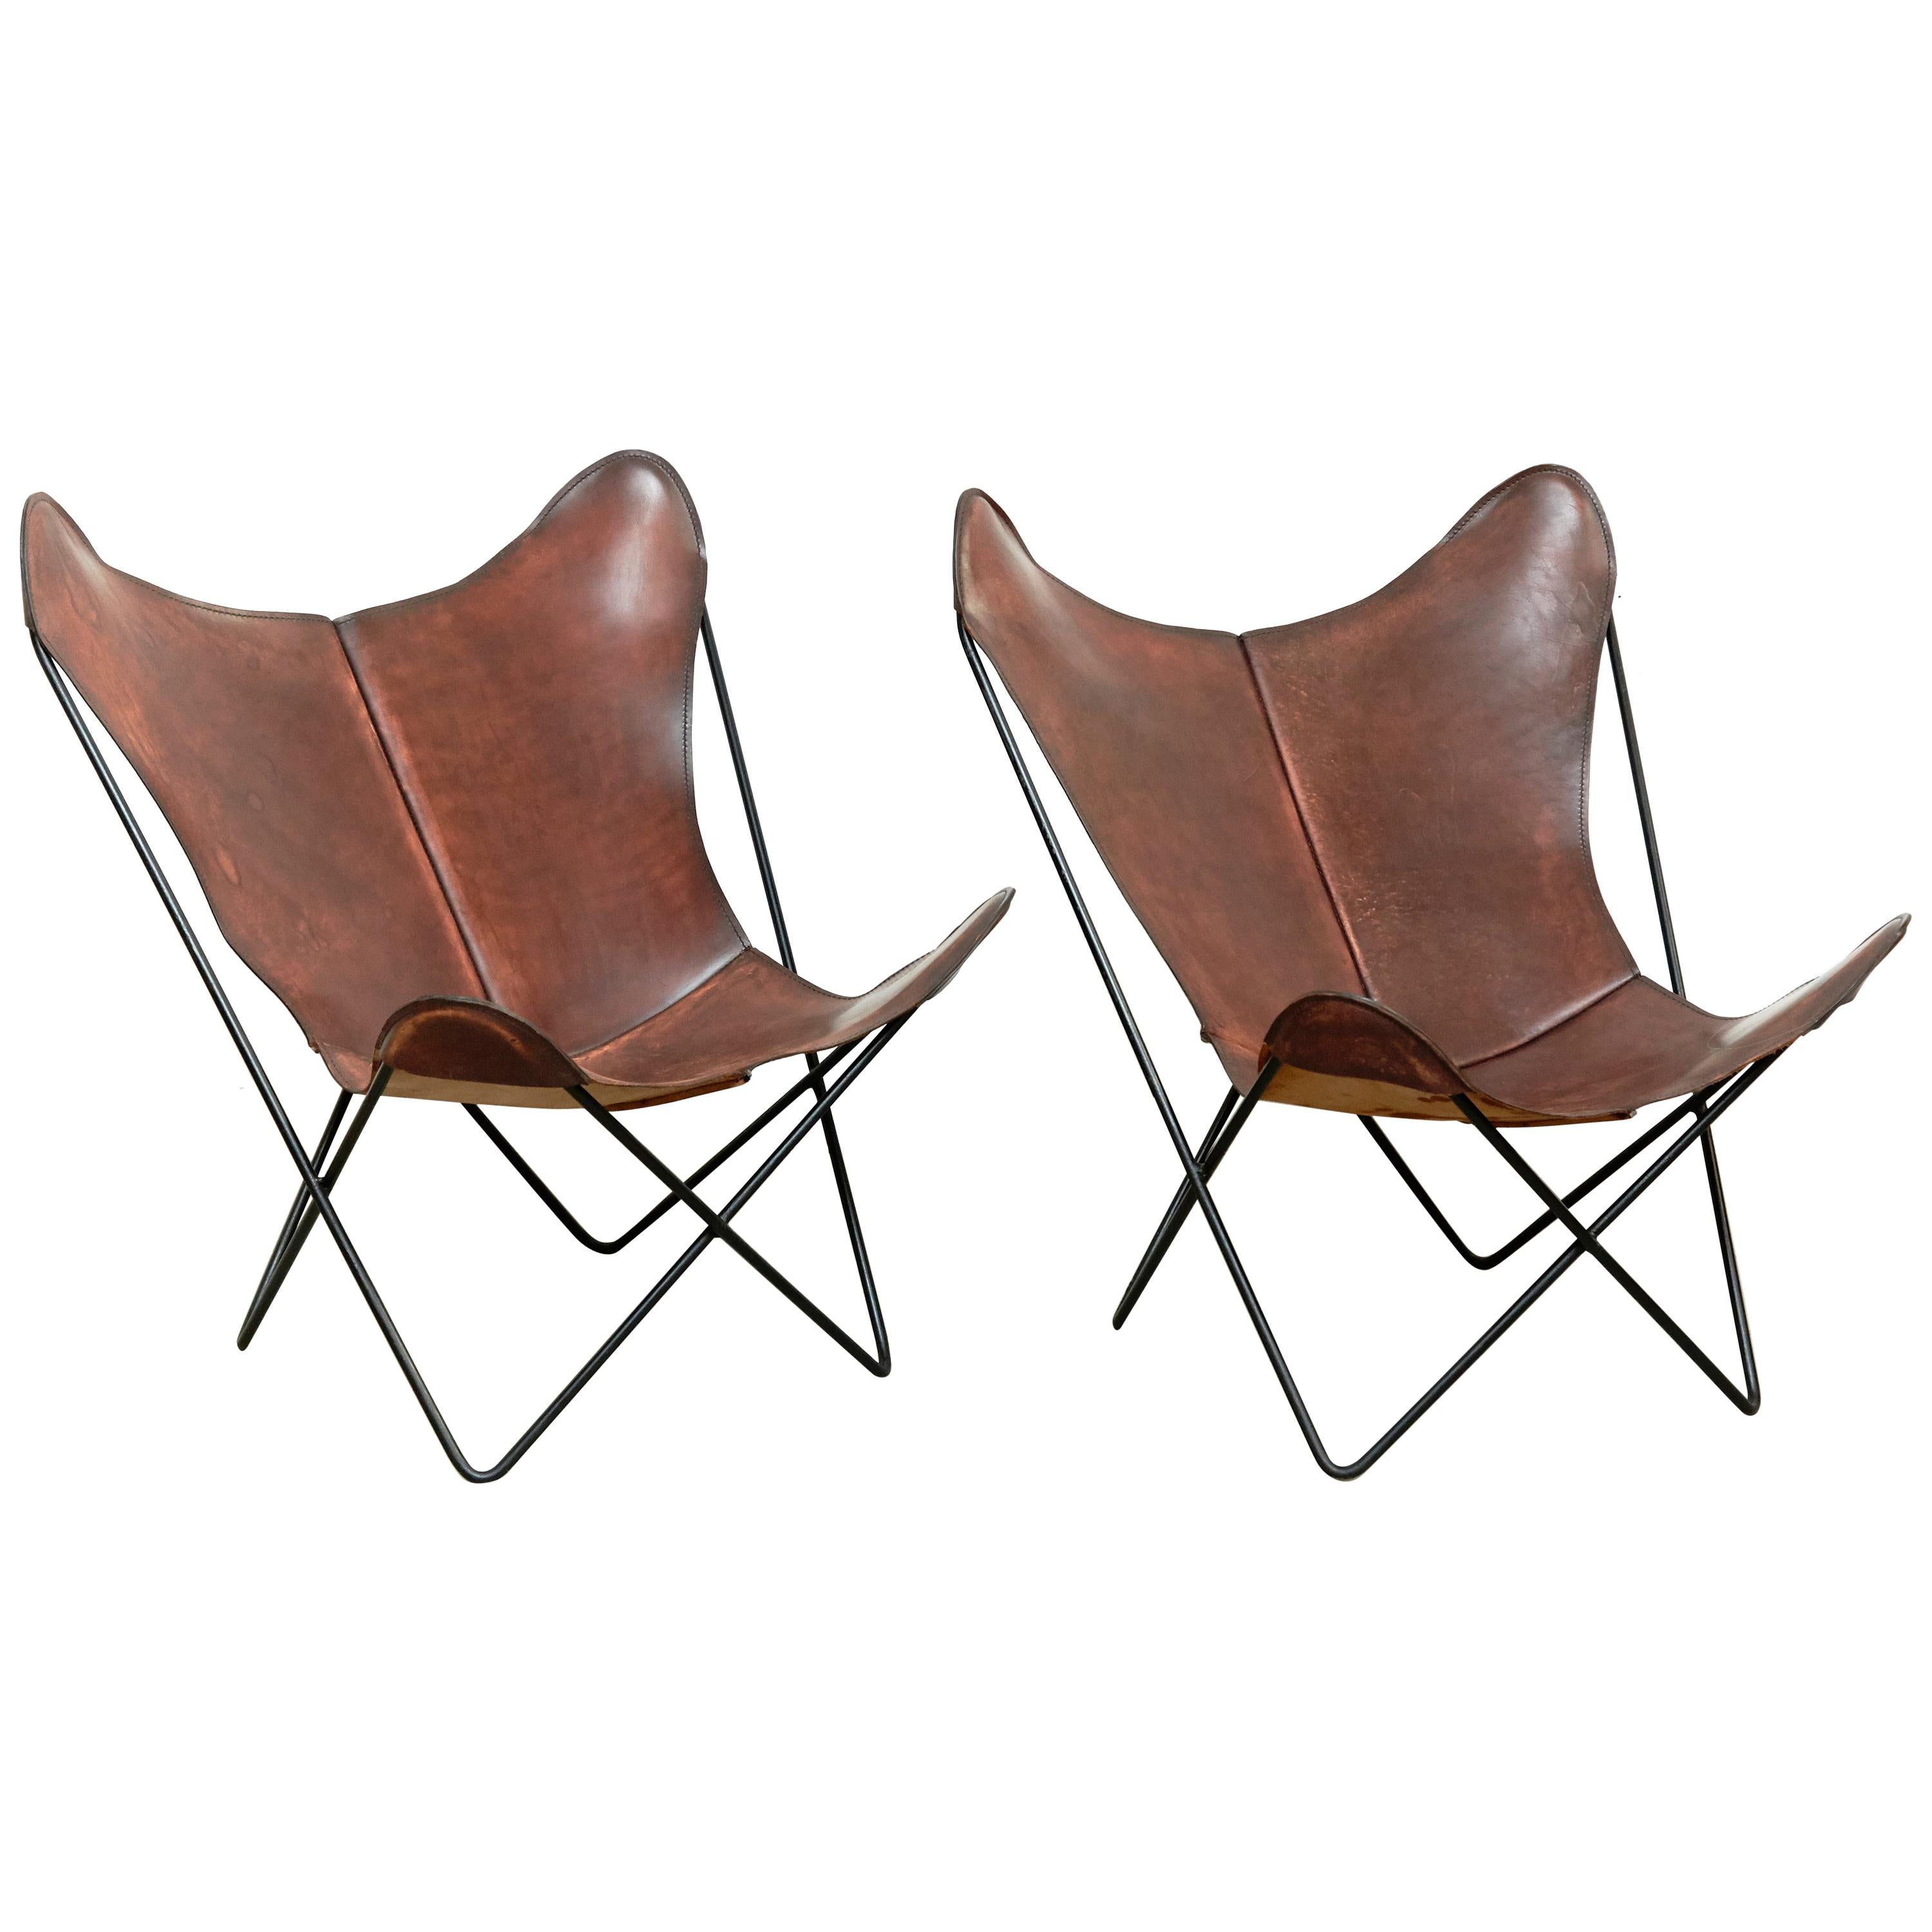 Pair of Bkf Butterfly Lounge Leather Chairs, circa 1980